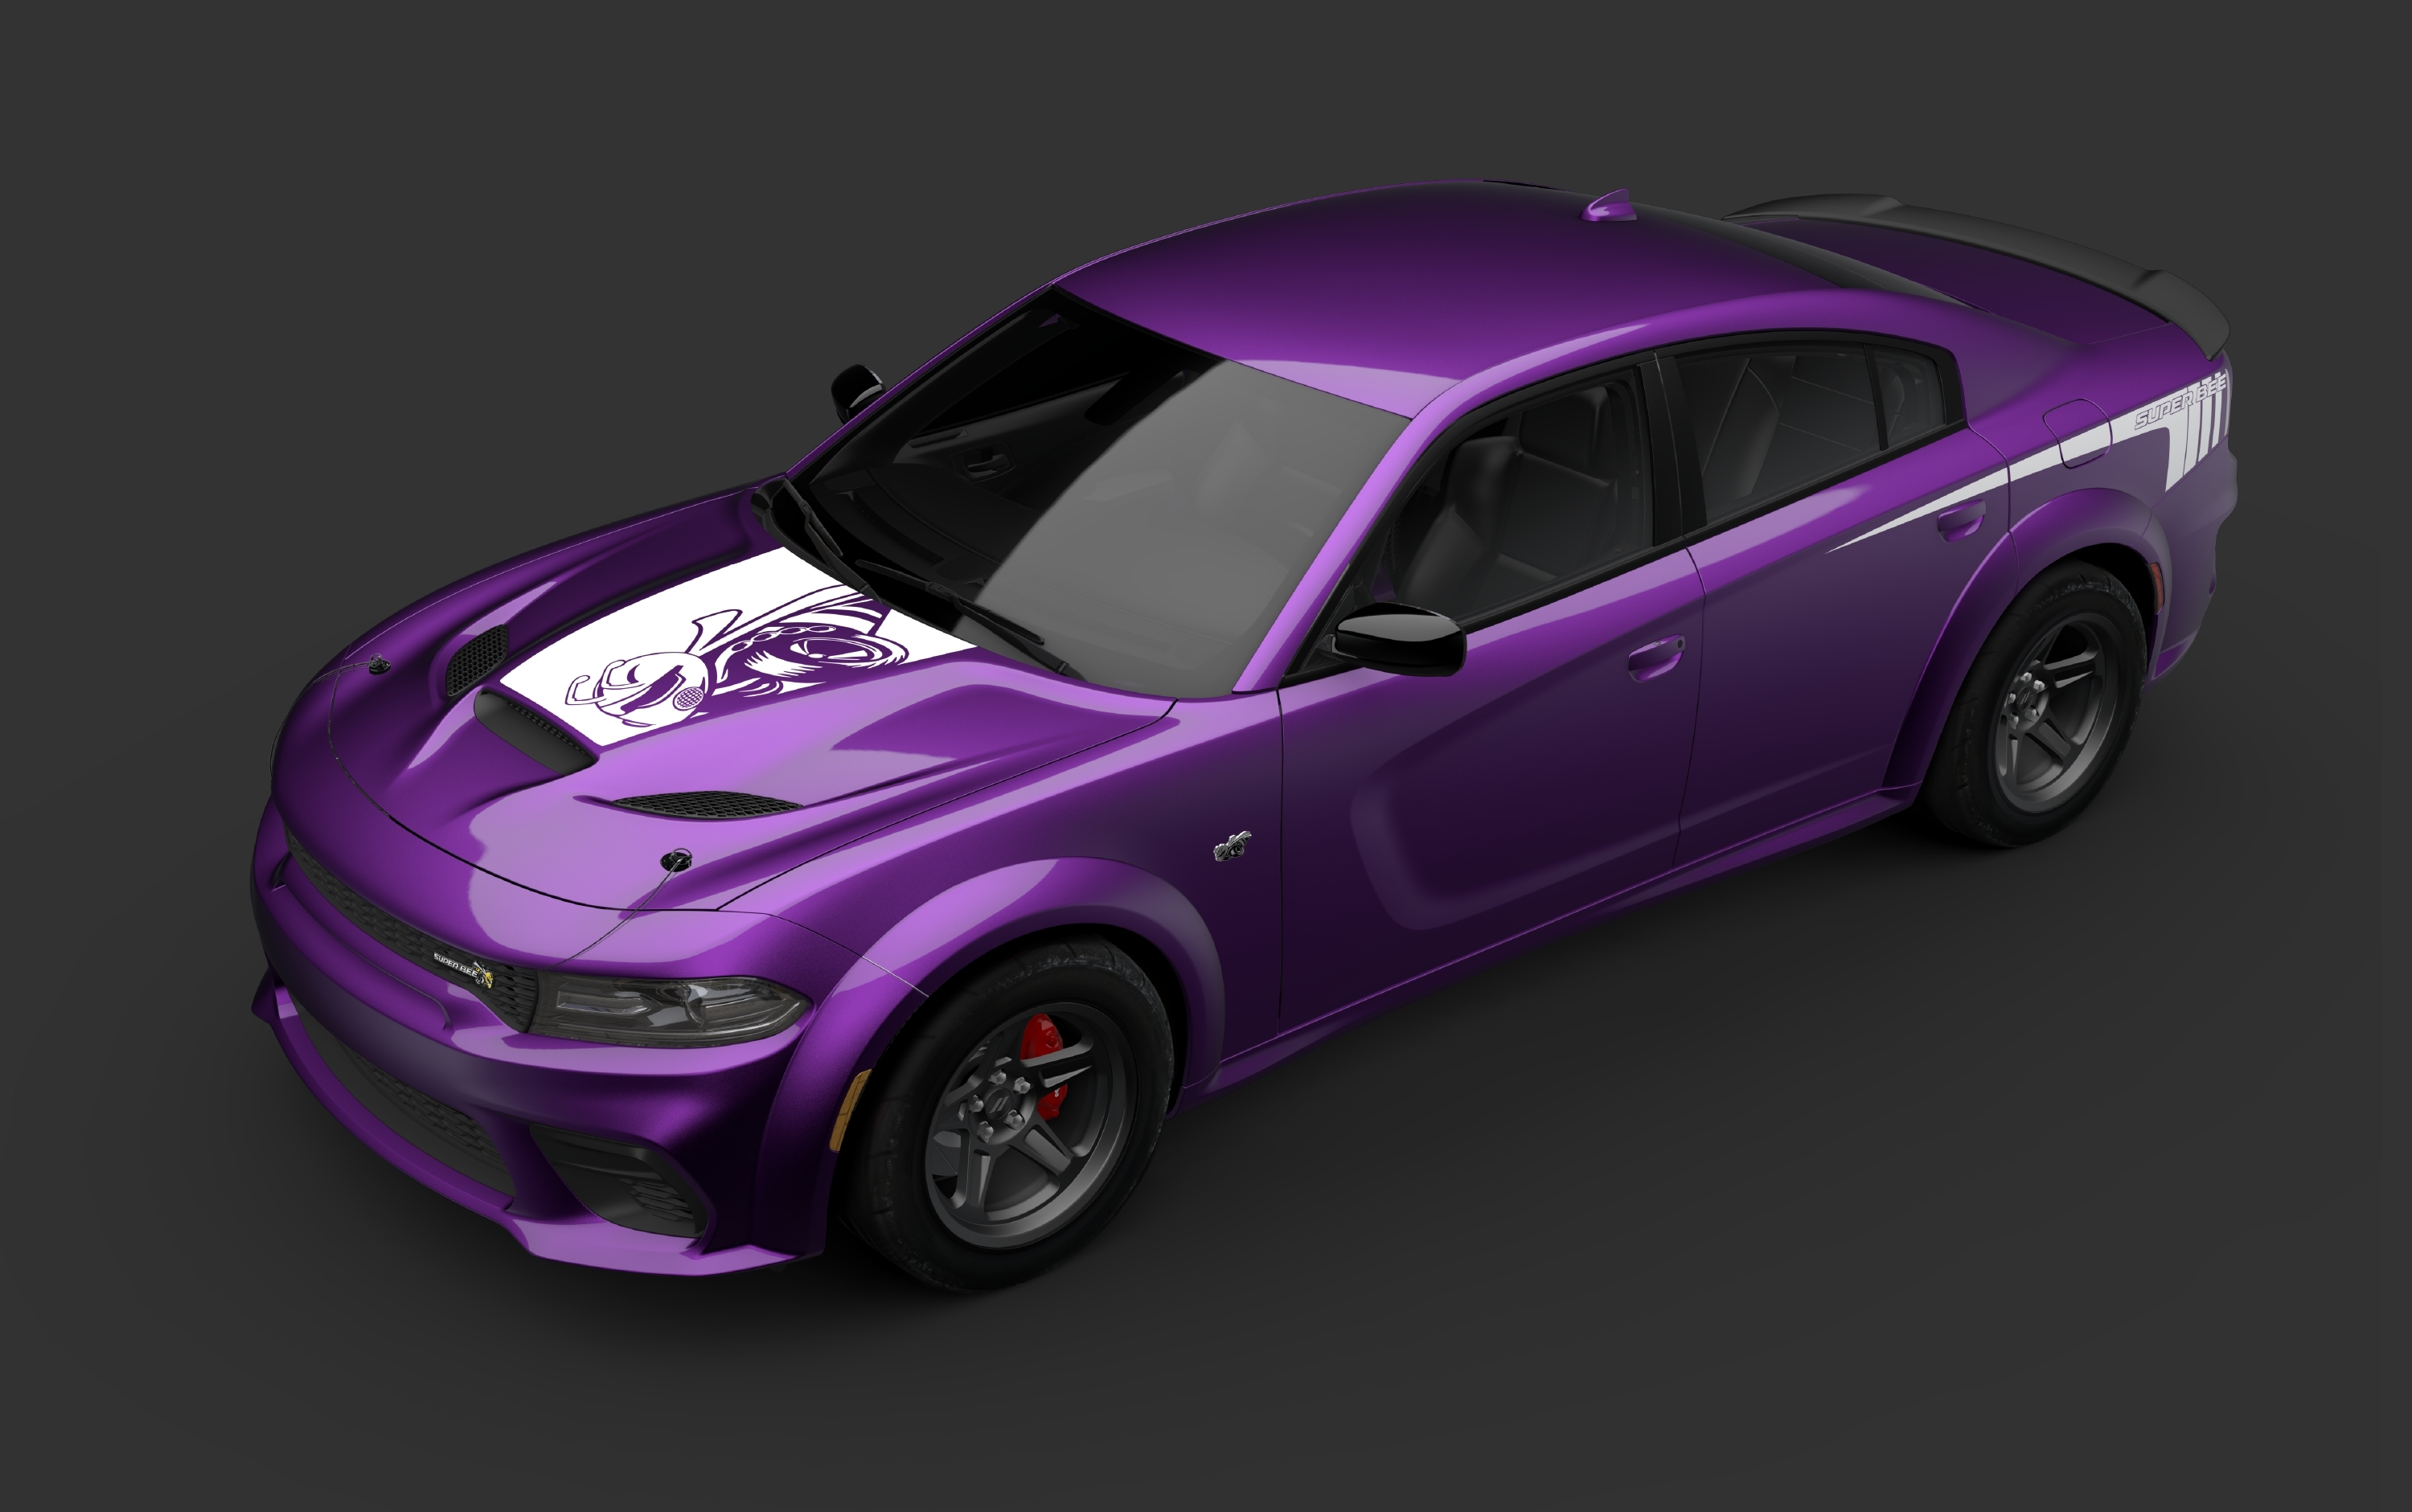 Dodge Charger Super Bee Announced; 2 of 7 “Last Call” Models